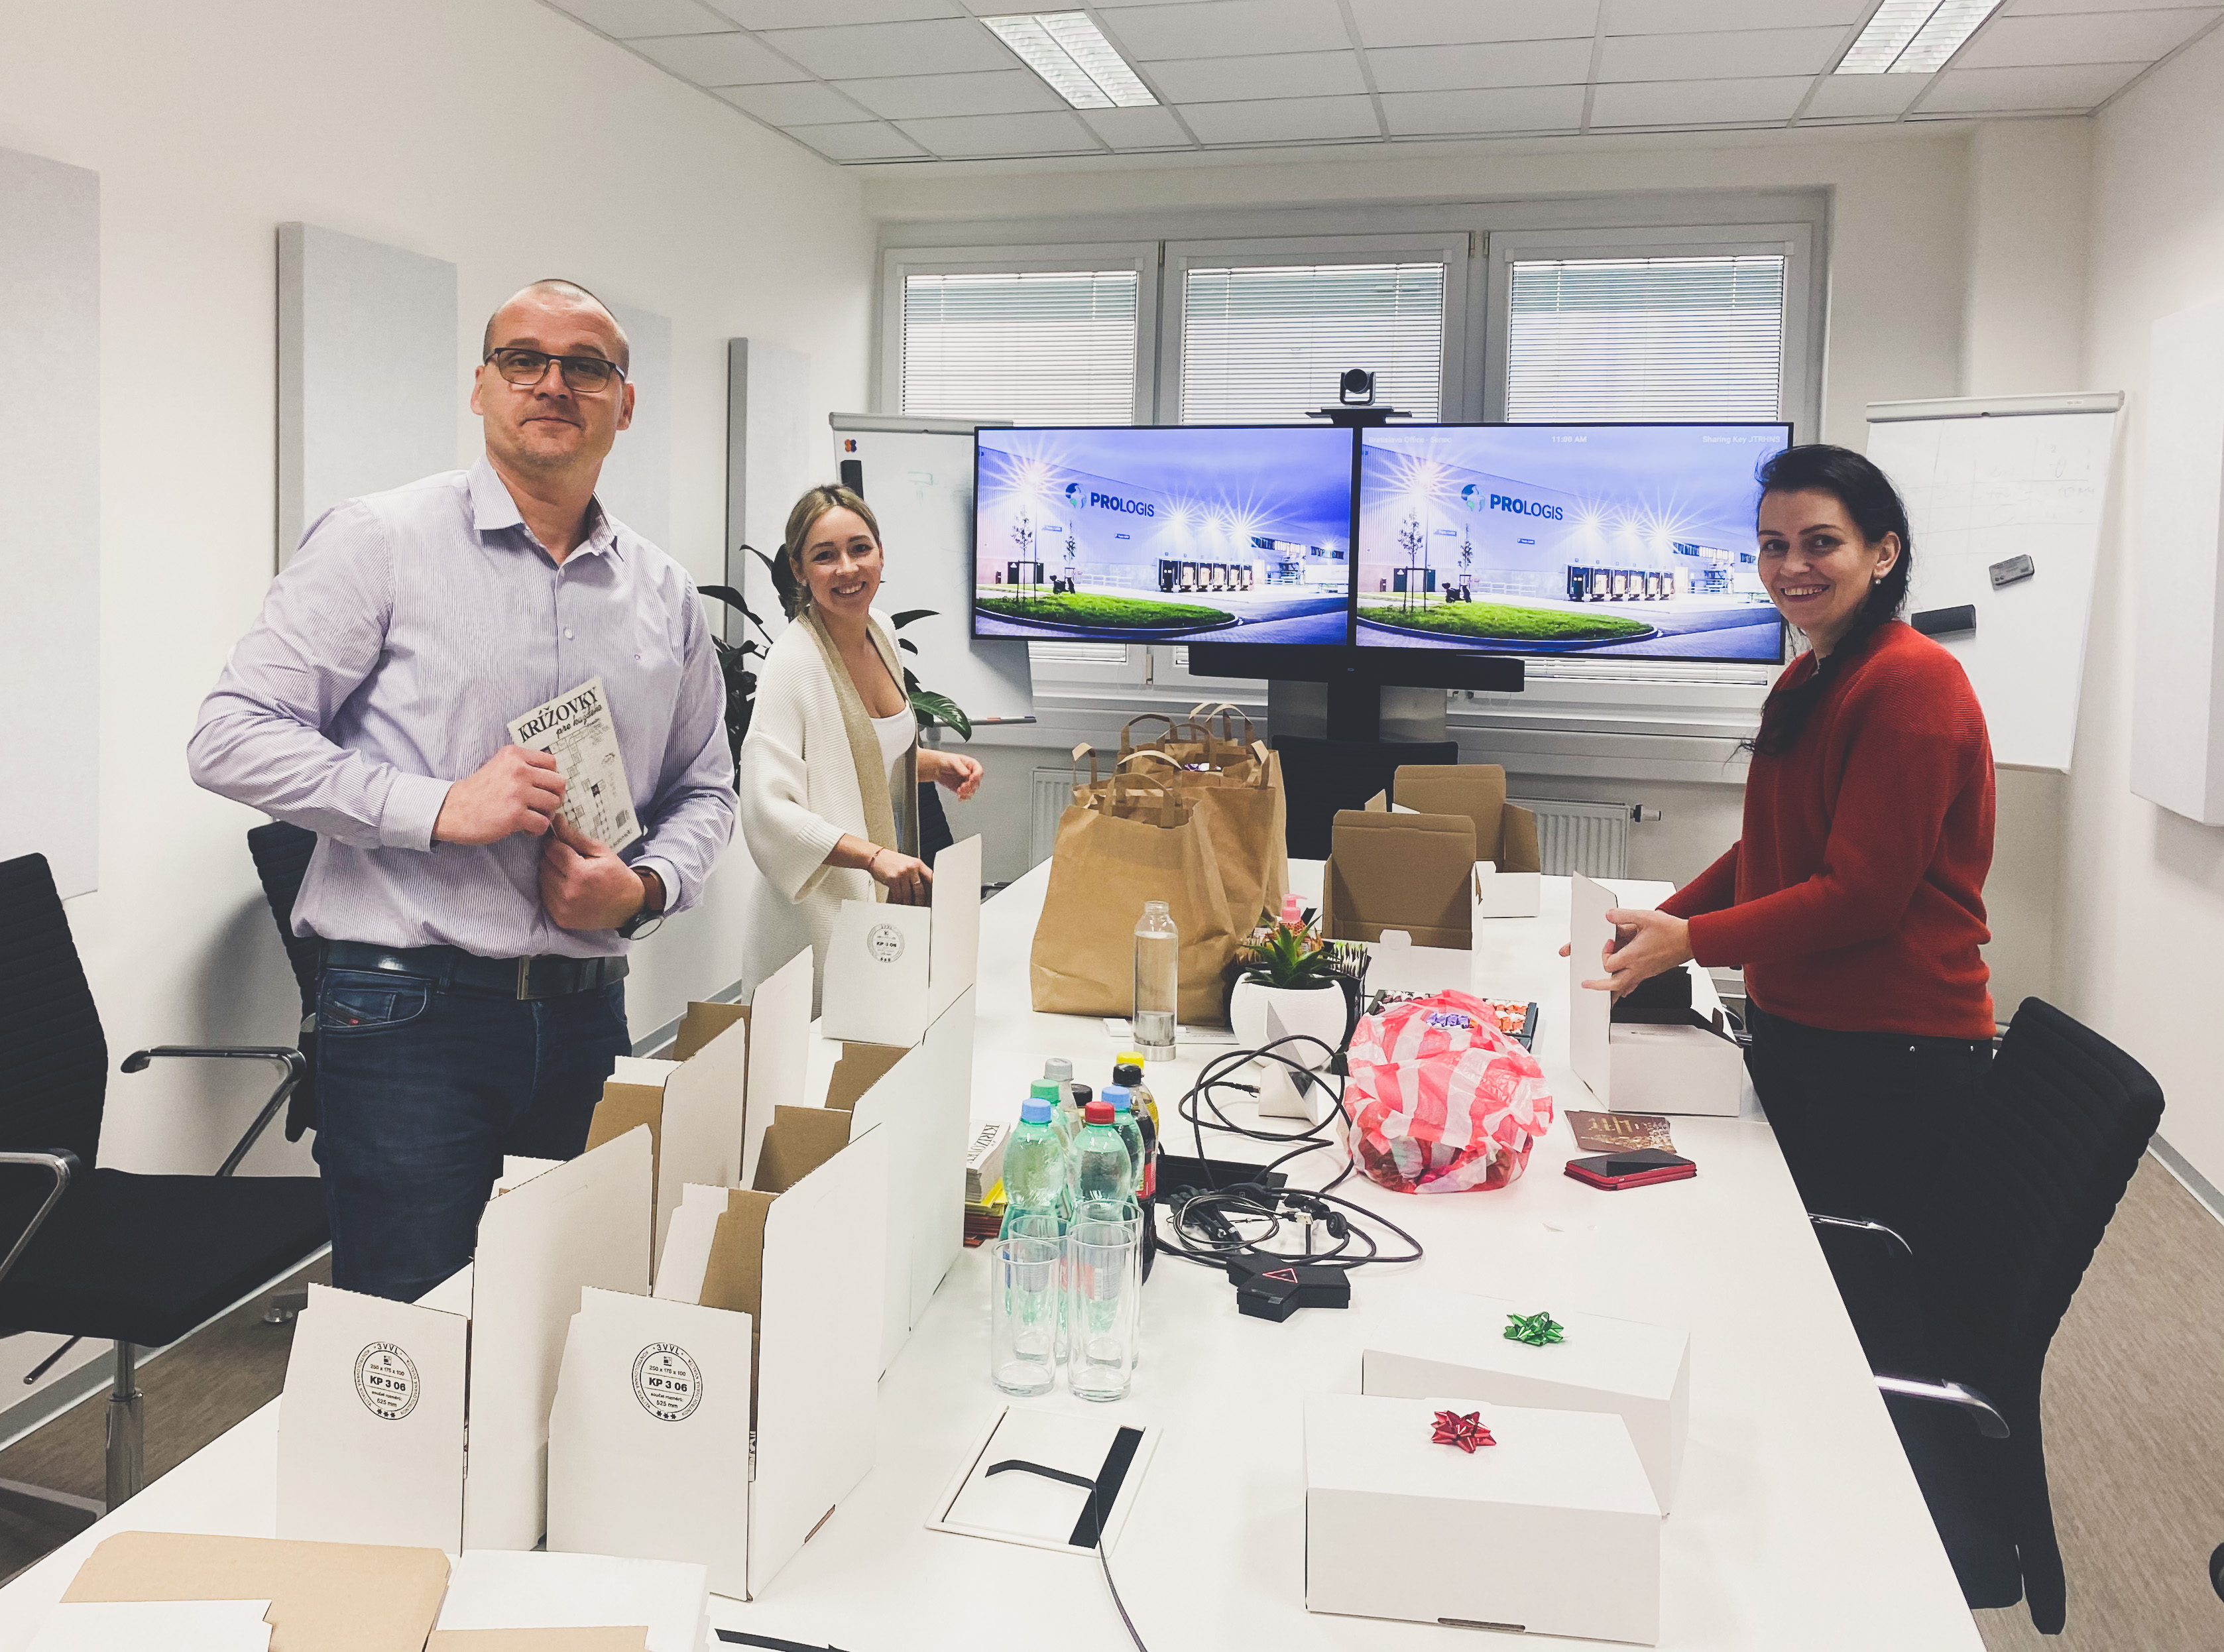 Czech Prologis Team preparing gifts for charity action 